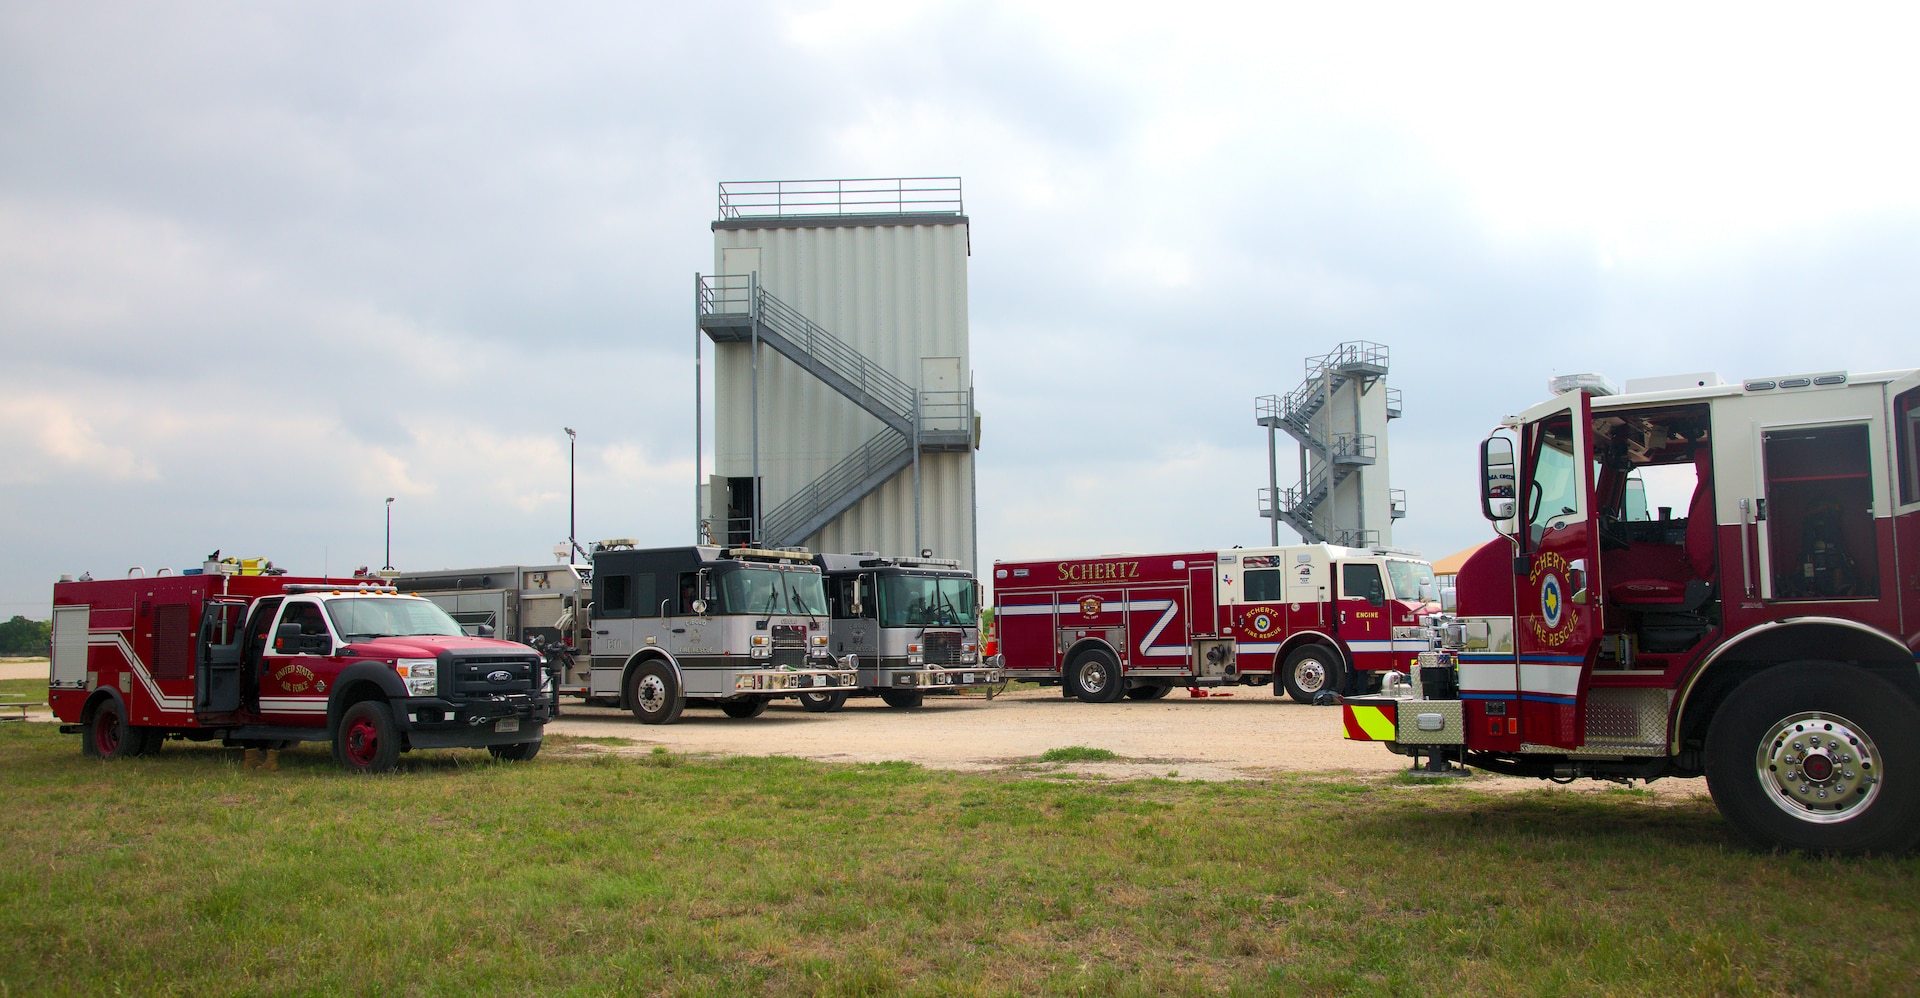 Jbsa Fes Trains With Local Fire Departments Washington Headquarters Services News Display